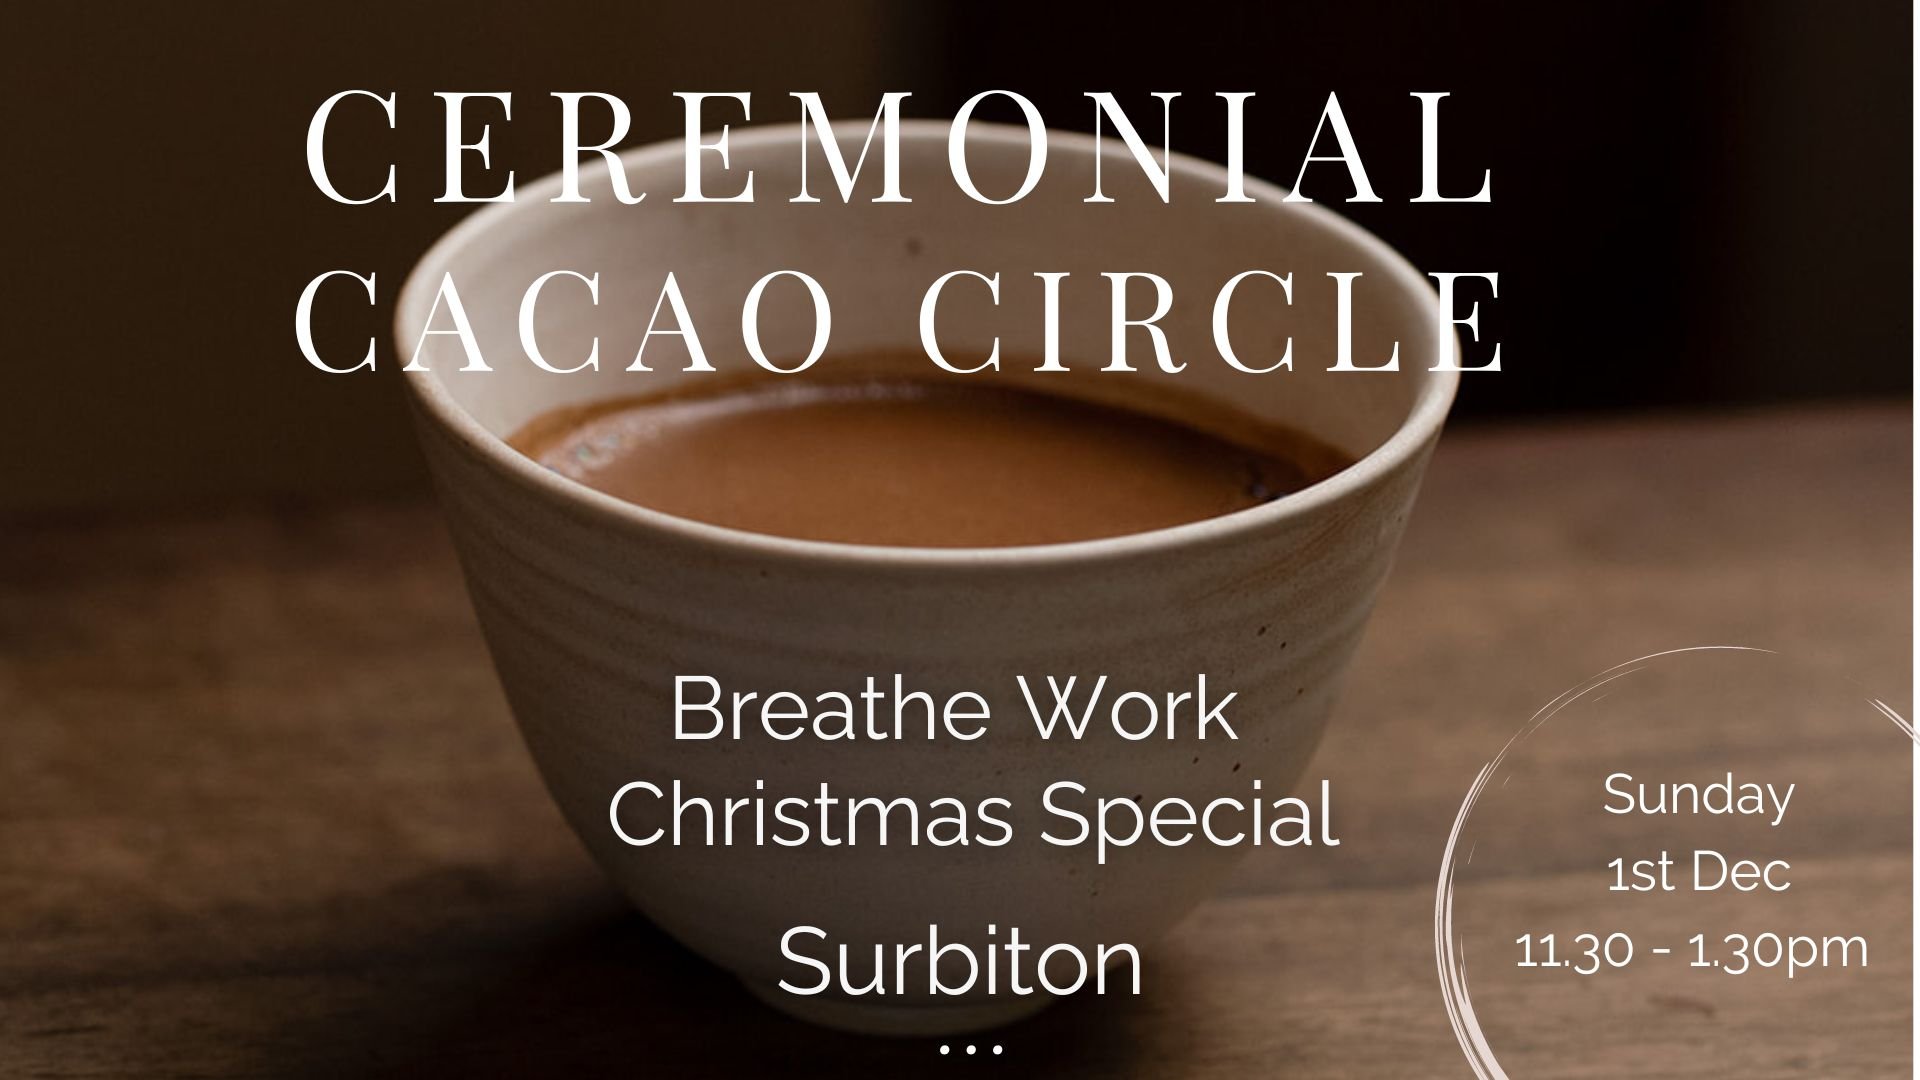 Ceremonial Cacao Circle - Christmas Breath Work workshop